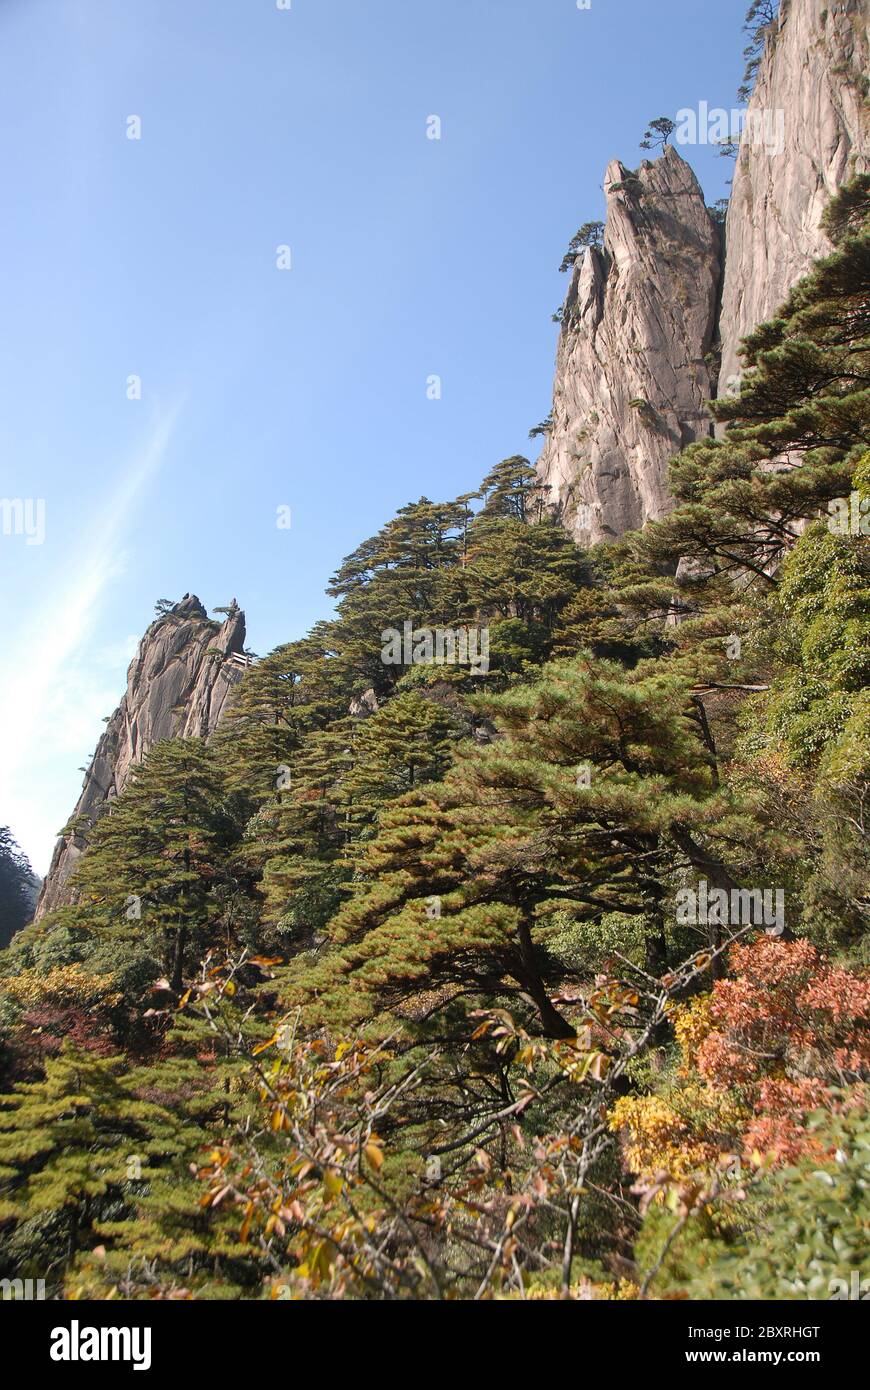 Huangshan Mountain in Anhui Province, China. Scenic view of mountain peaks, cliffs and trees in the West Sea or Xi Hai canyon on Huangshan Stock Photo